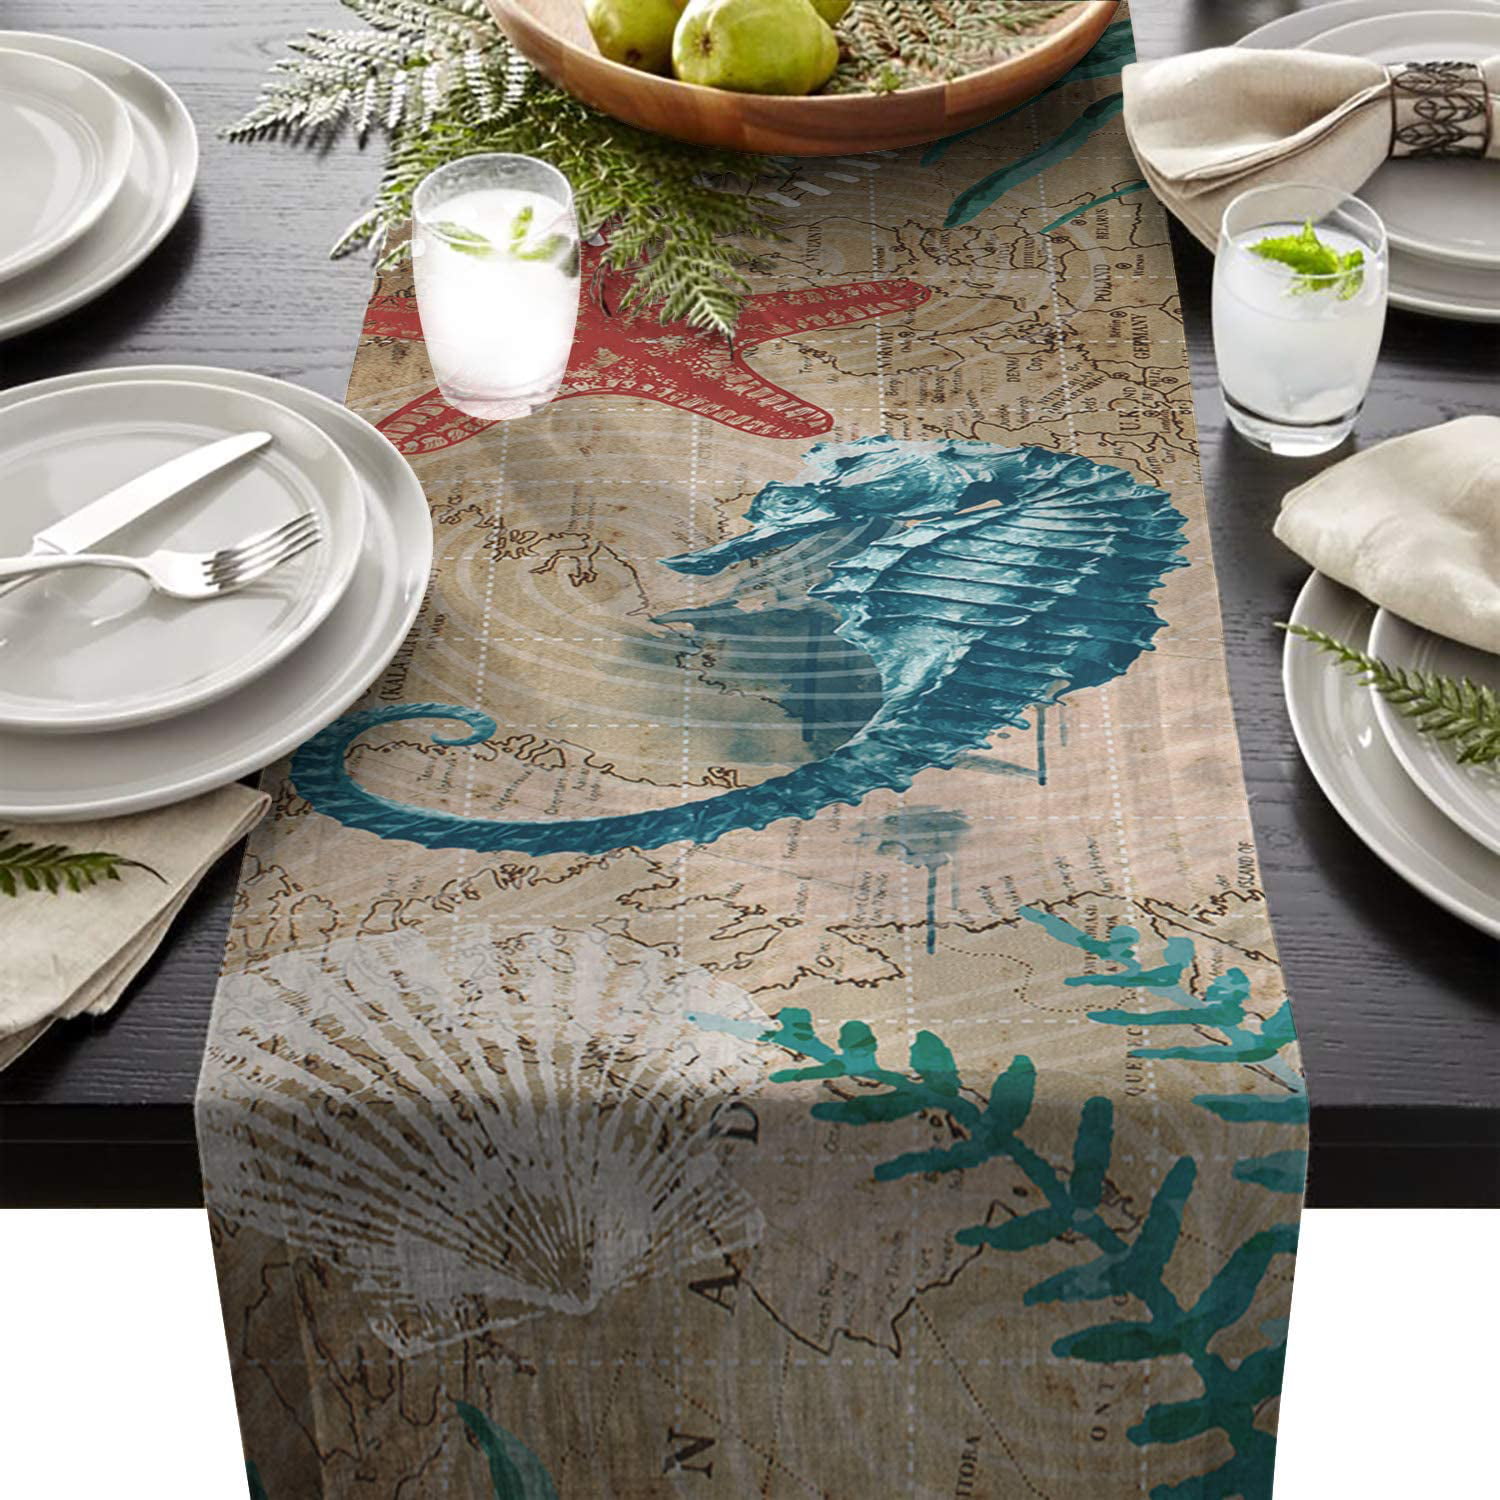 Sea Animal Seahorse Print Table Runner+Summer Autumn Festival Dresser Scarves Non-Slip Heat Resistant Table Runners for Kitchen Dining Table Party Wedding Holiday Events 13 X 70 Inch